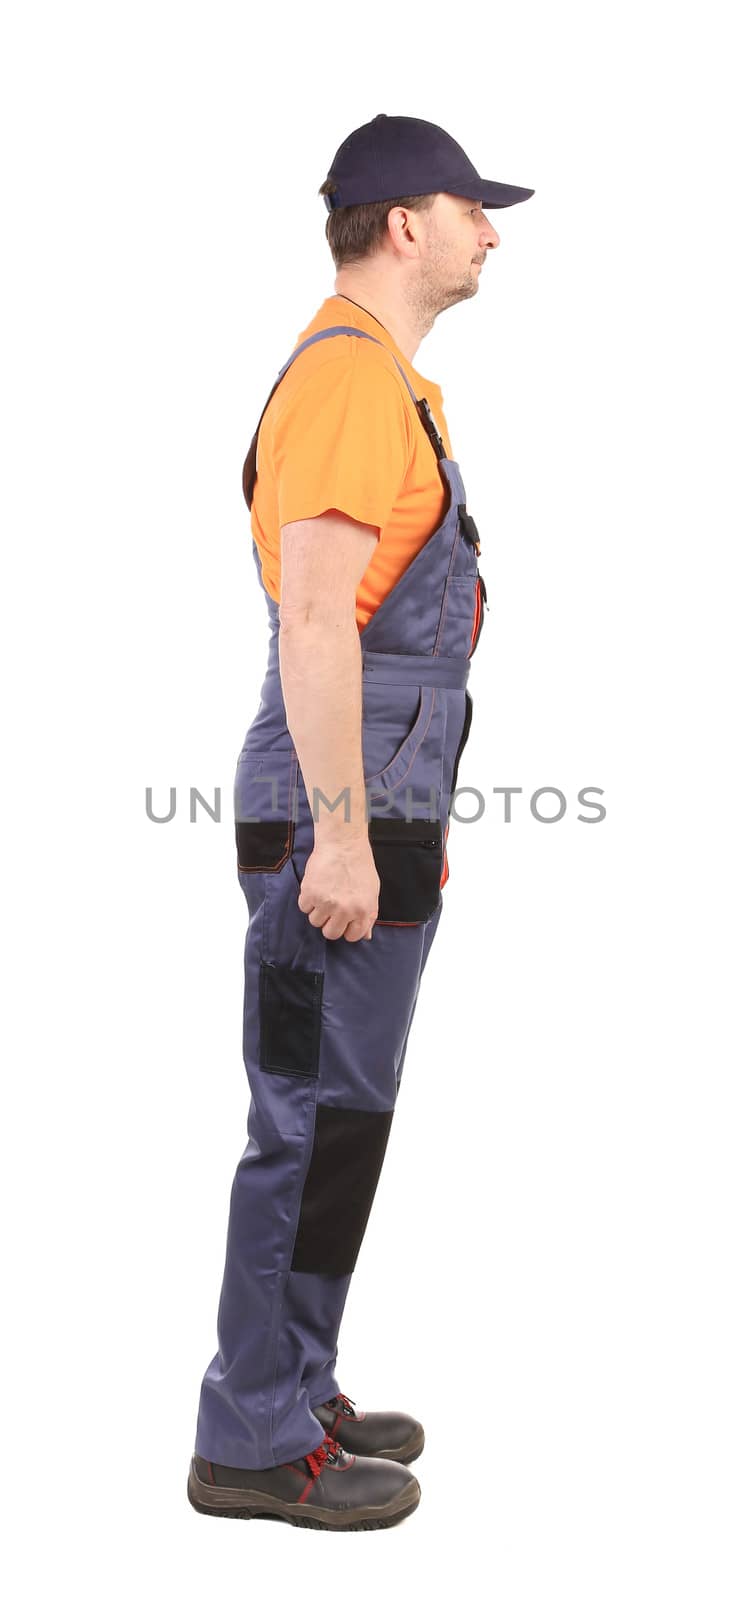 Worker wearing overalls. Isolated on a white background.